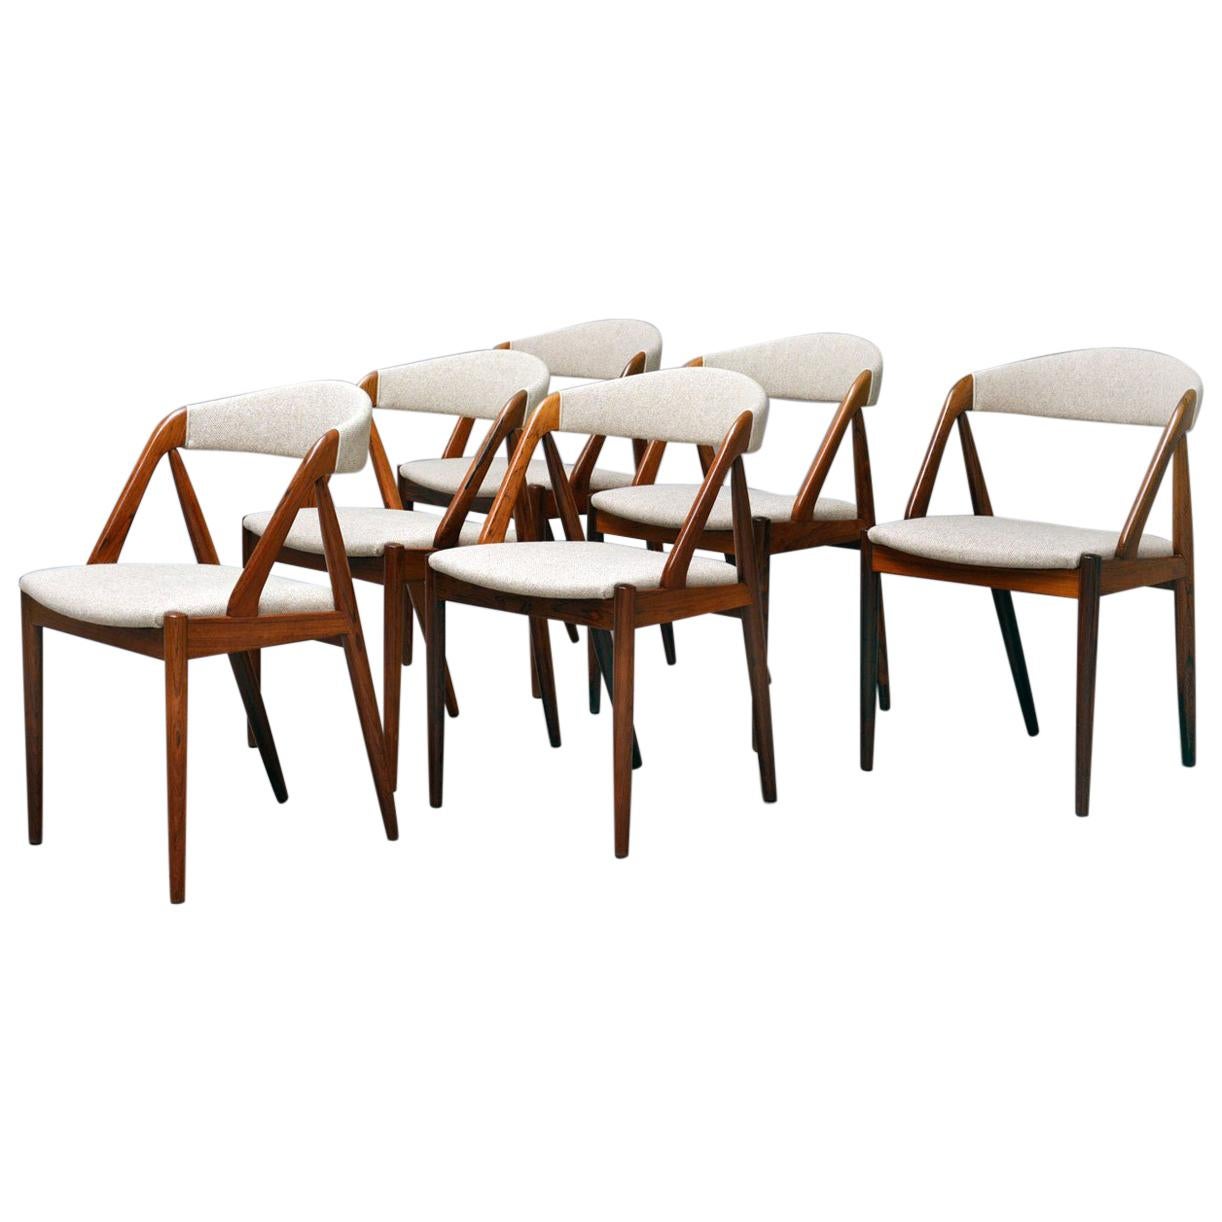 Rosewood Chairs by Kai Kristiansen, Set of 6 Chairs